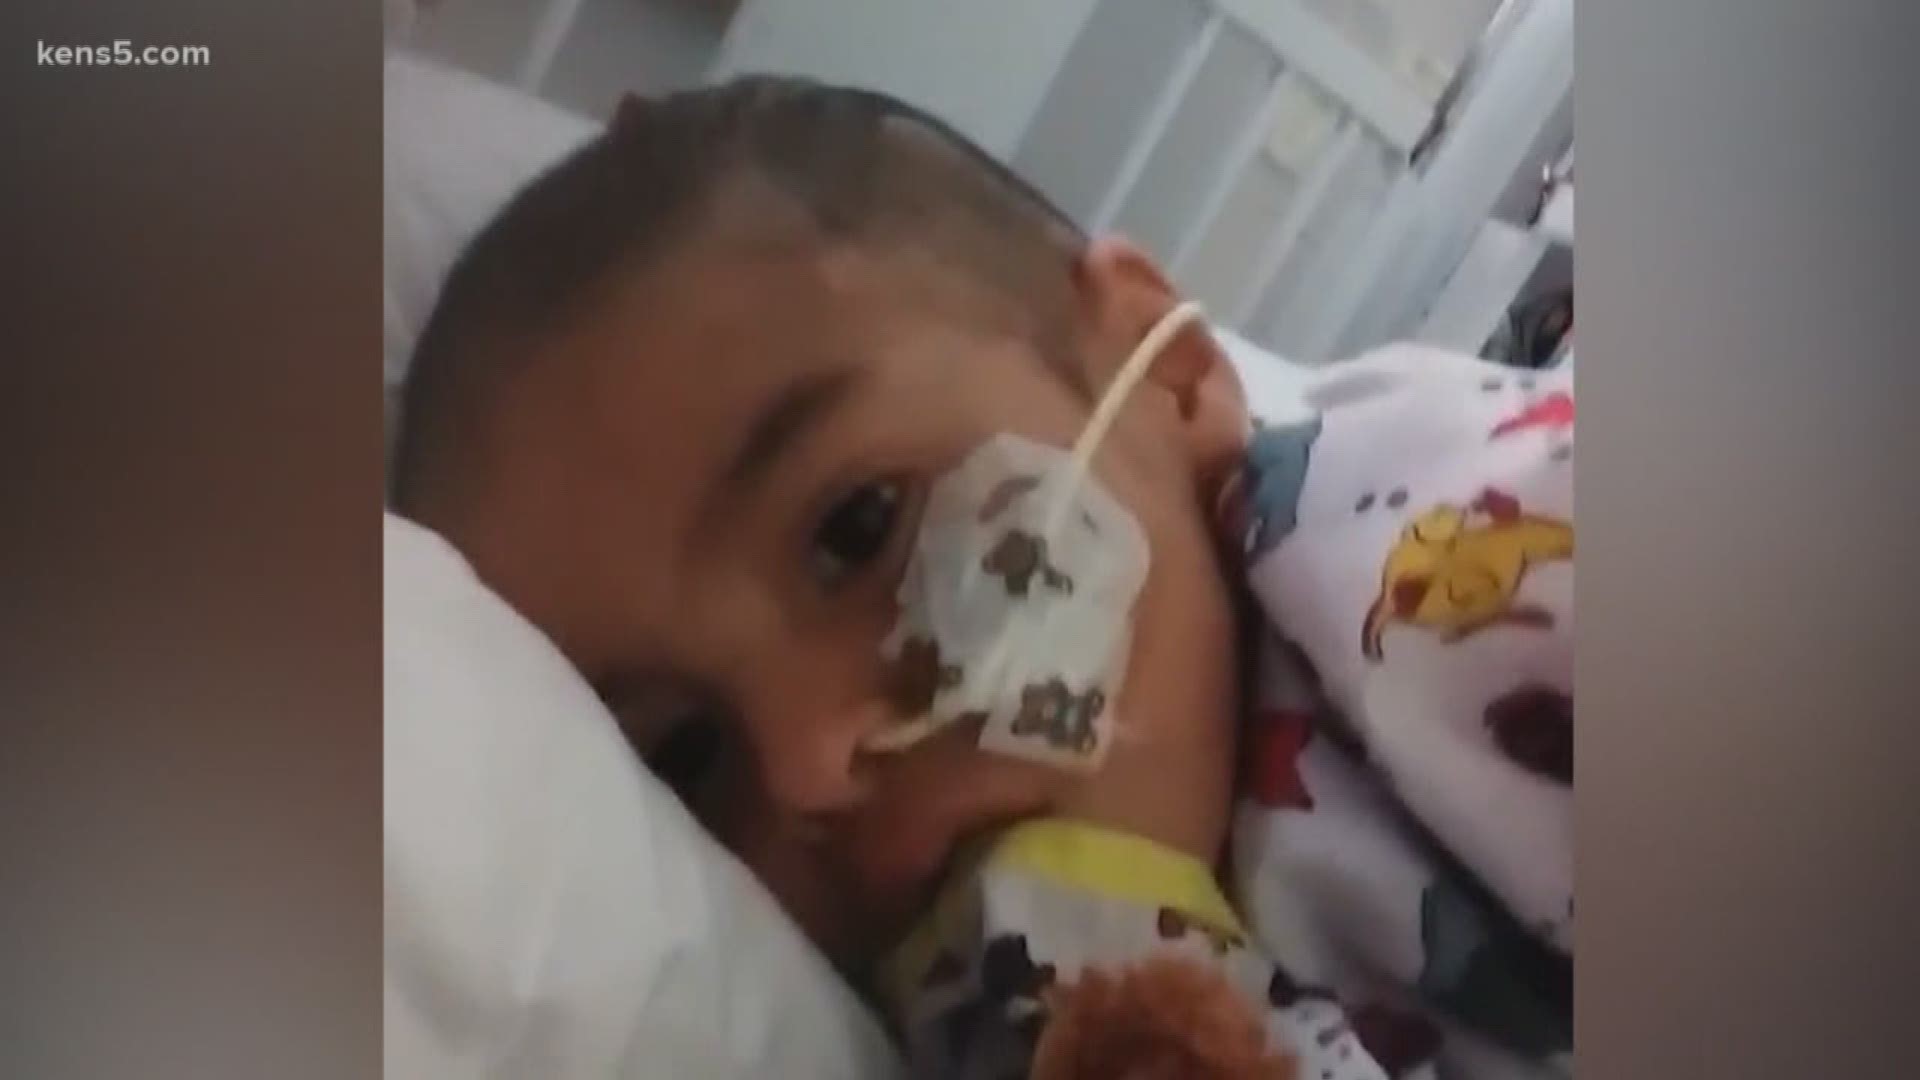 The family of a local 2-year-old diagnosed with a rare form of cancer says they are staying at the hospital to make sure he gets the treatment he needs to fight for his life.